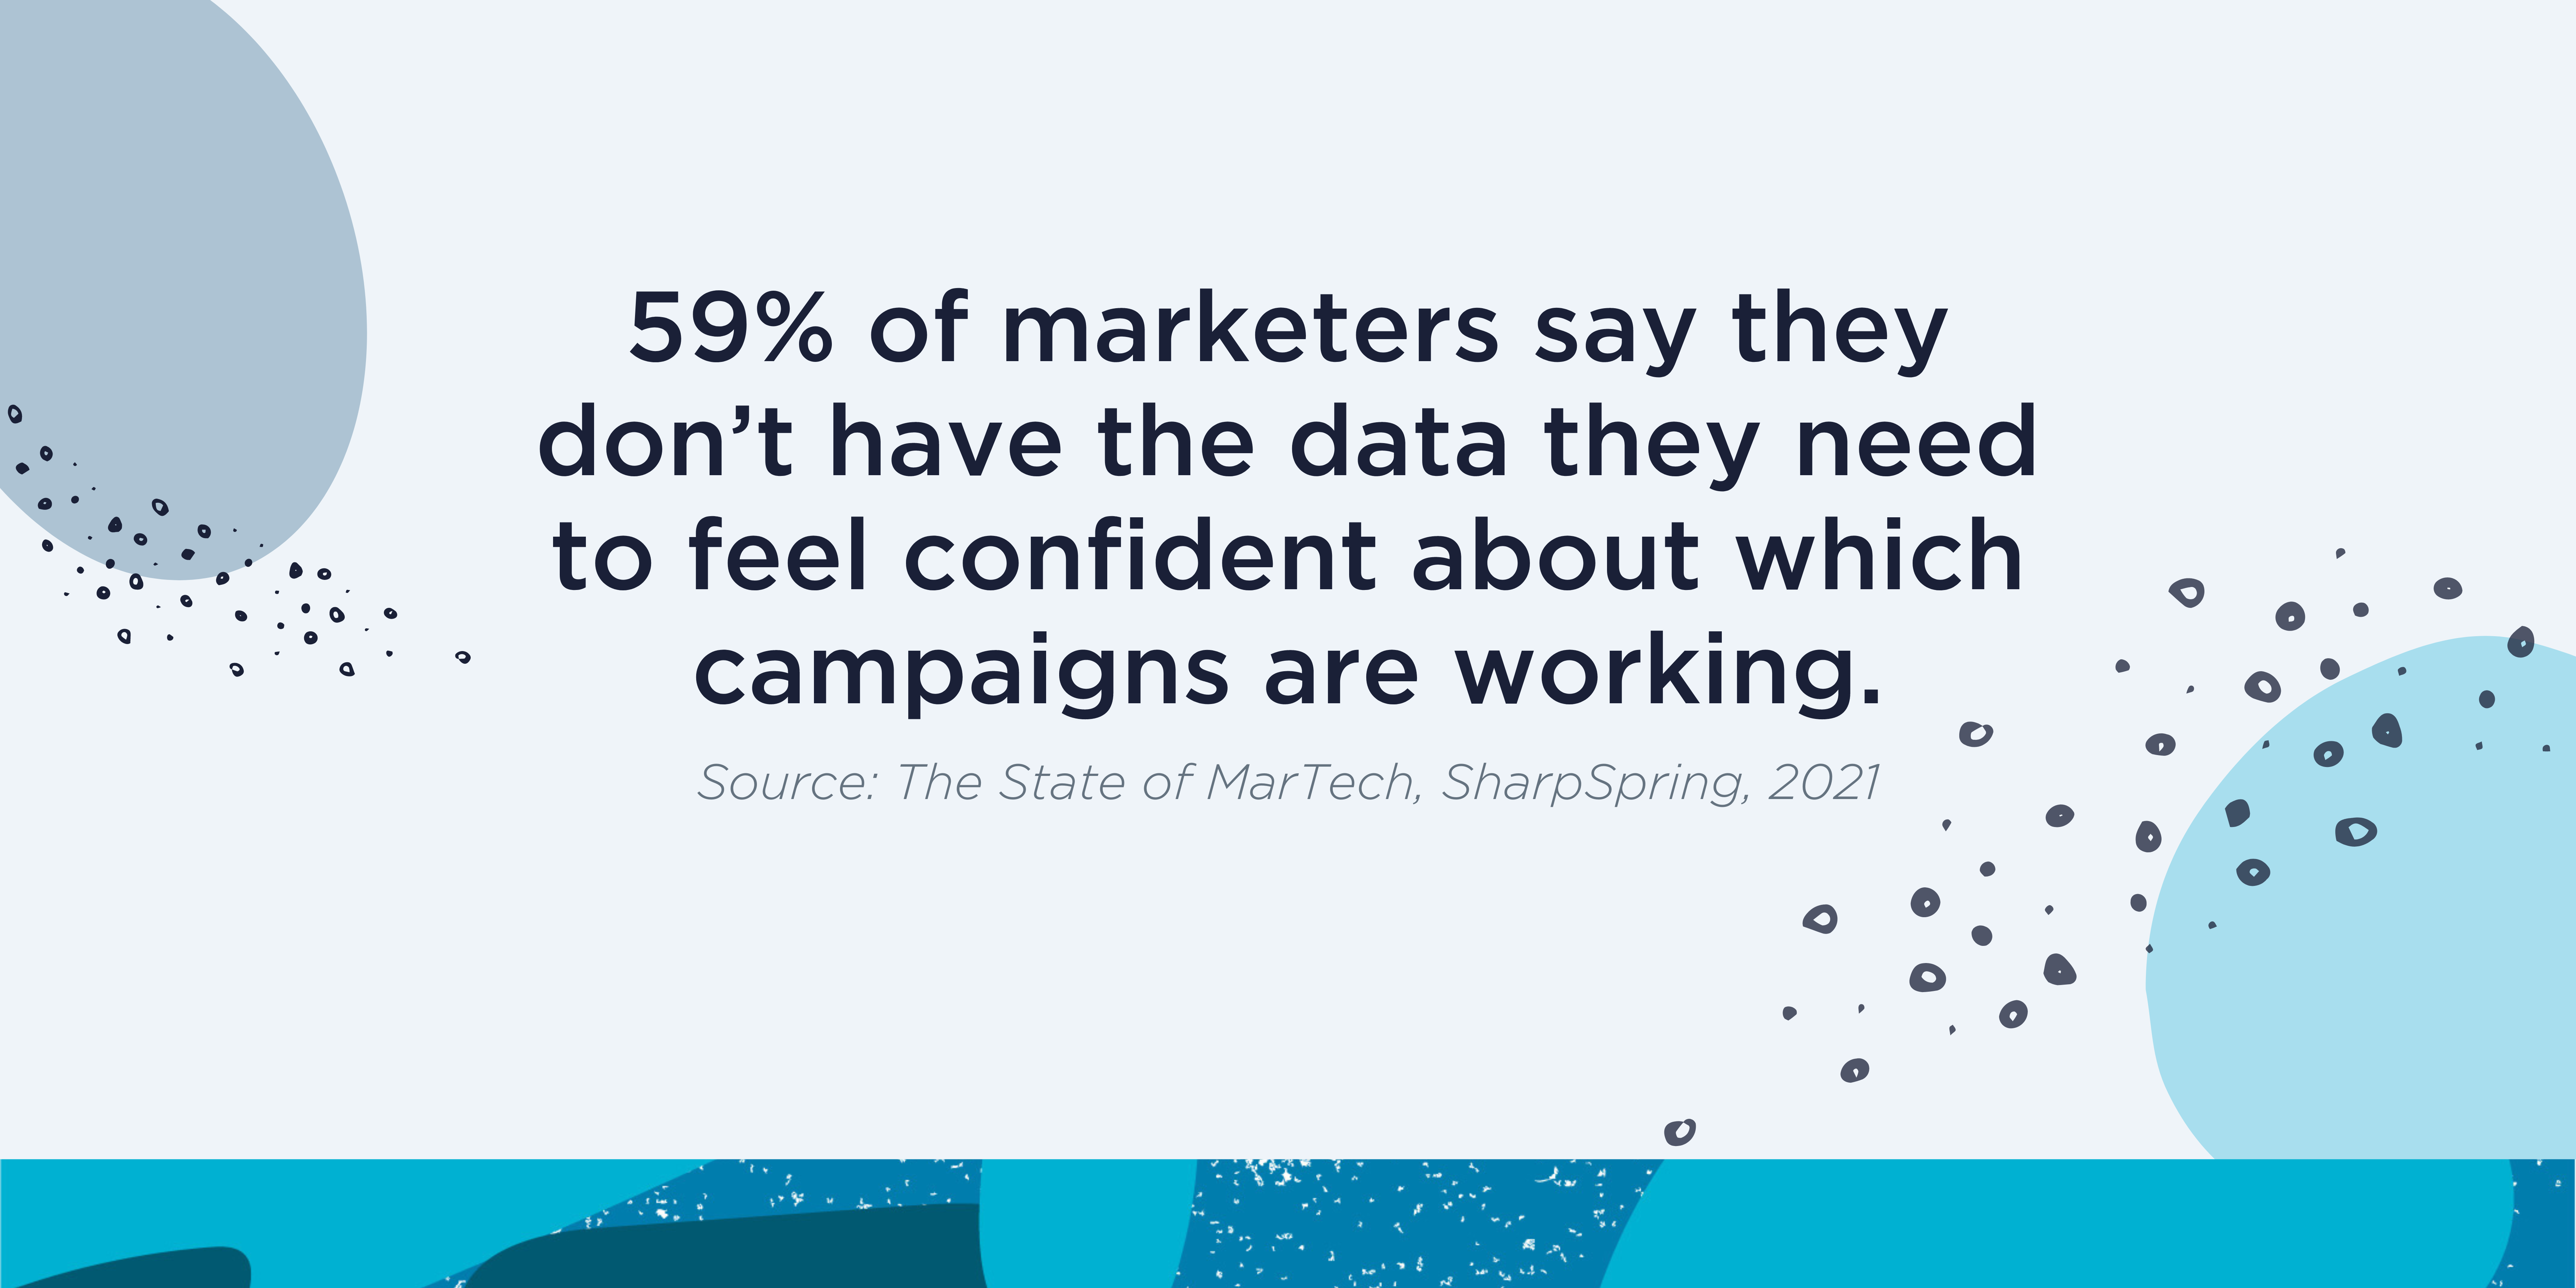 59% of marketers say they don't have the data they need to feel confident about which campaigns are working.